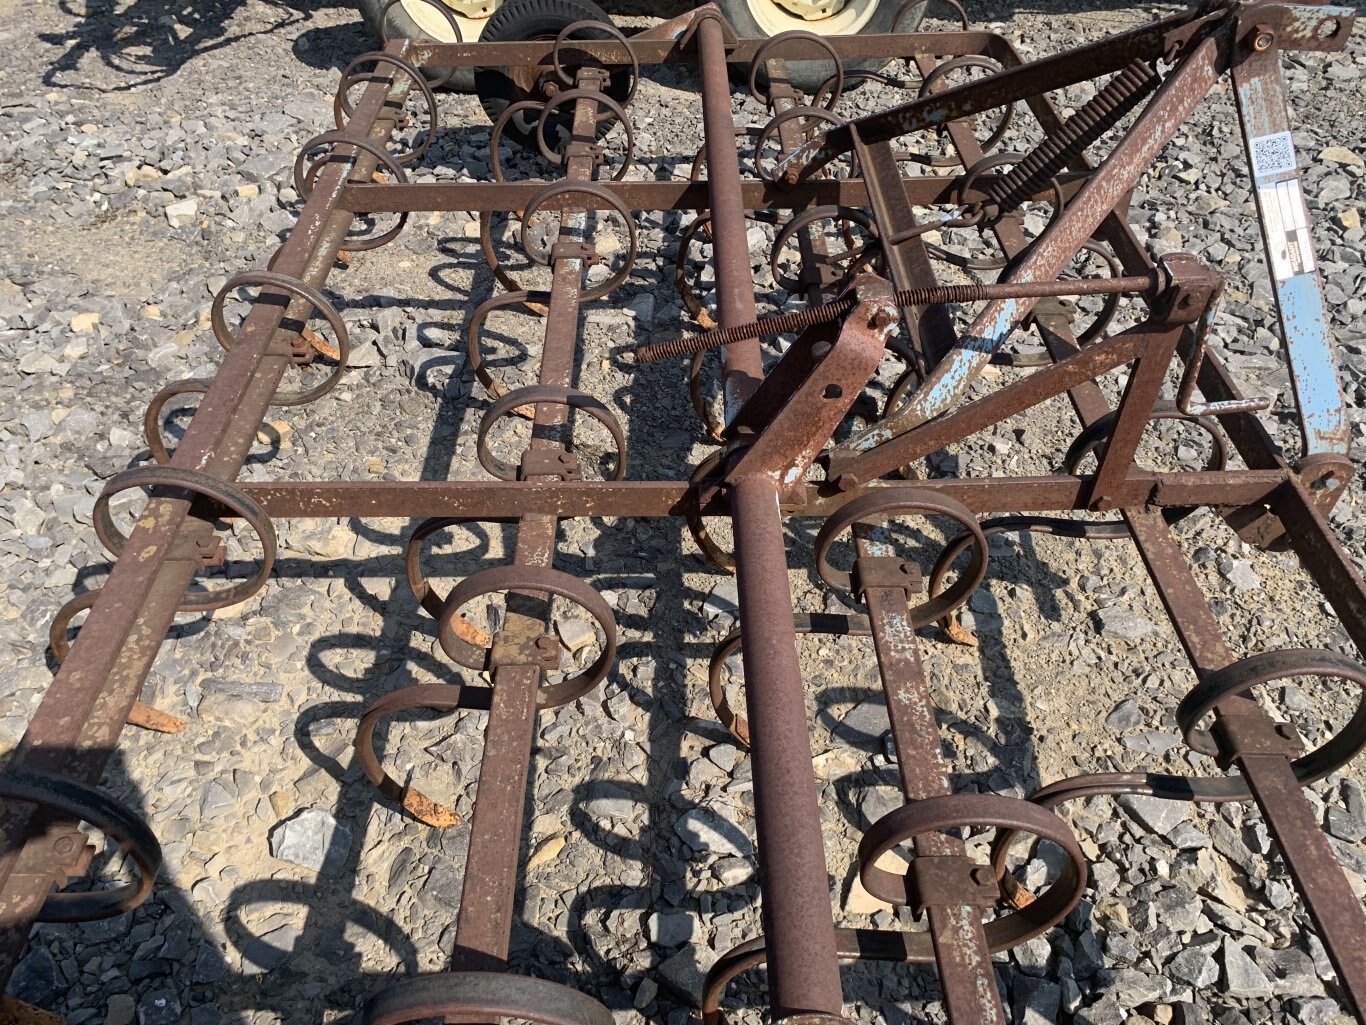 Used 9 Tine Cultivator